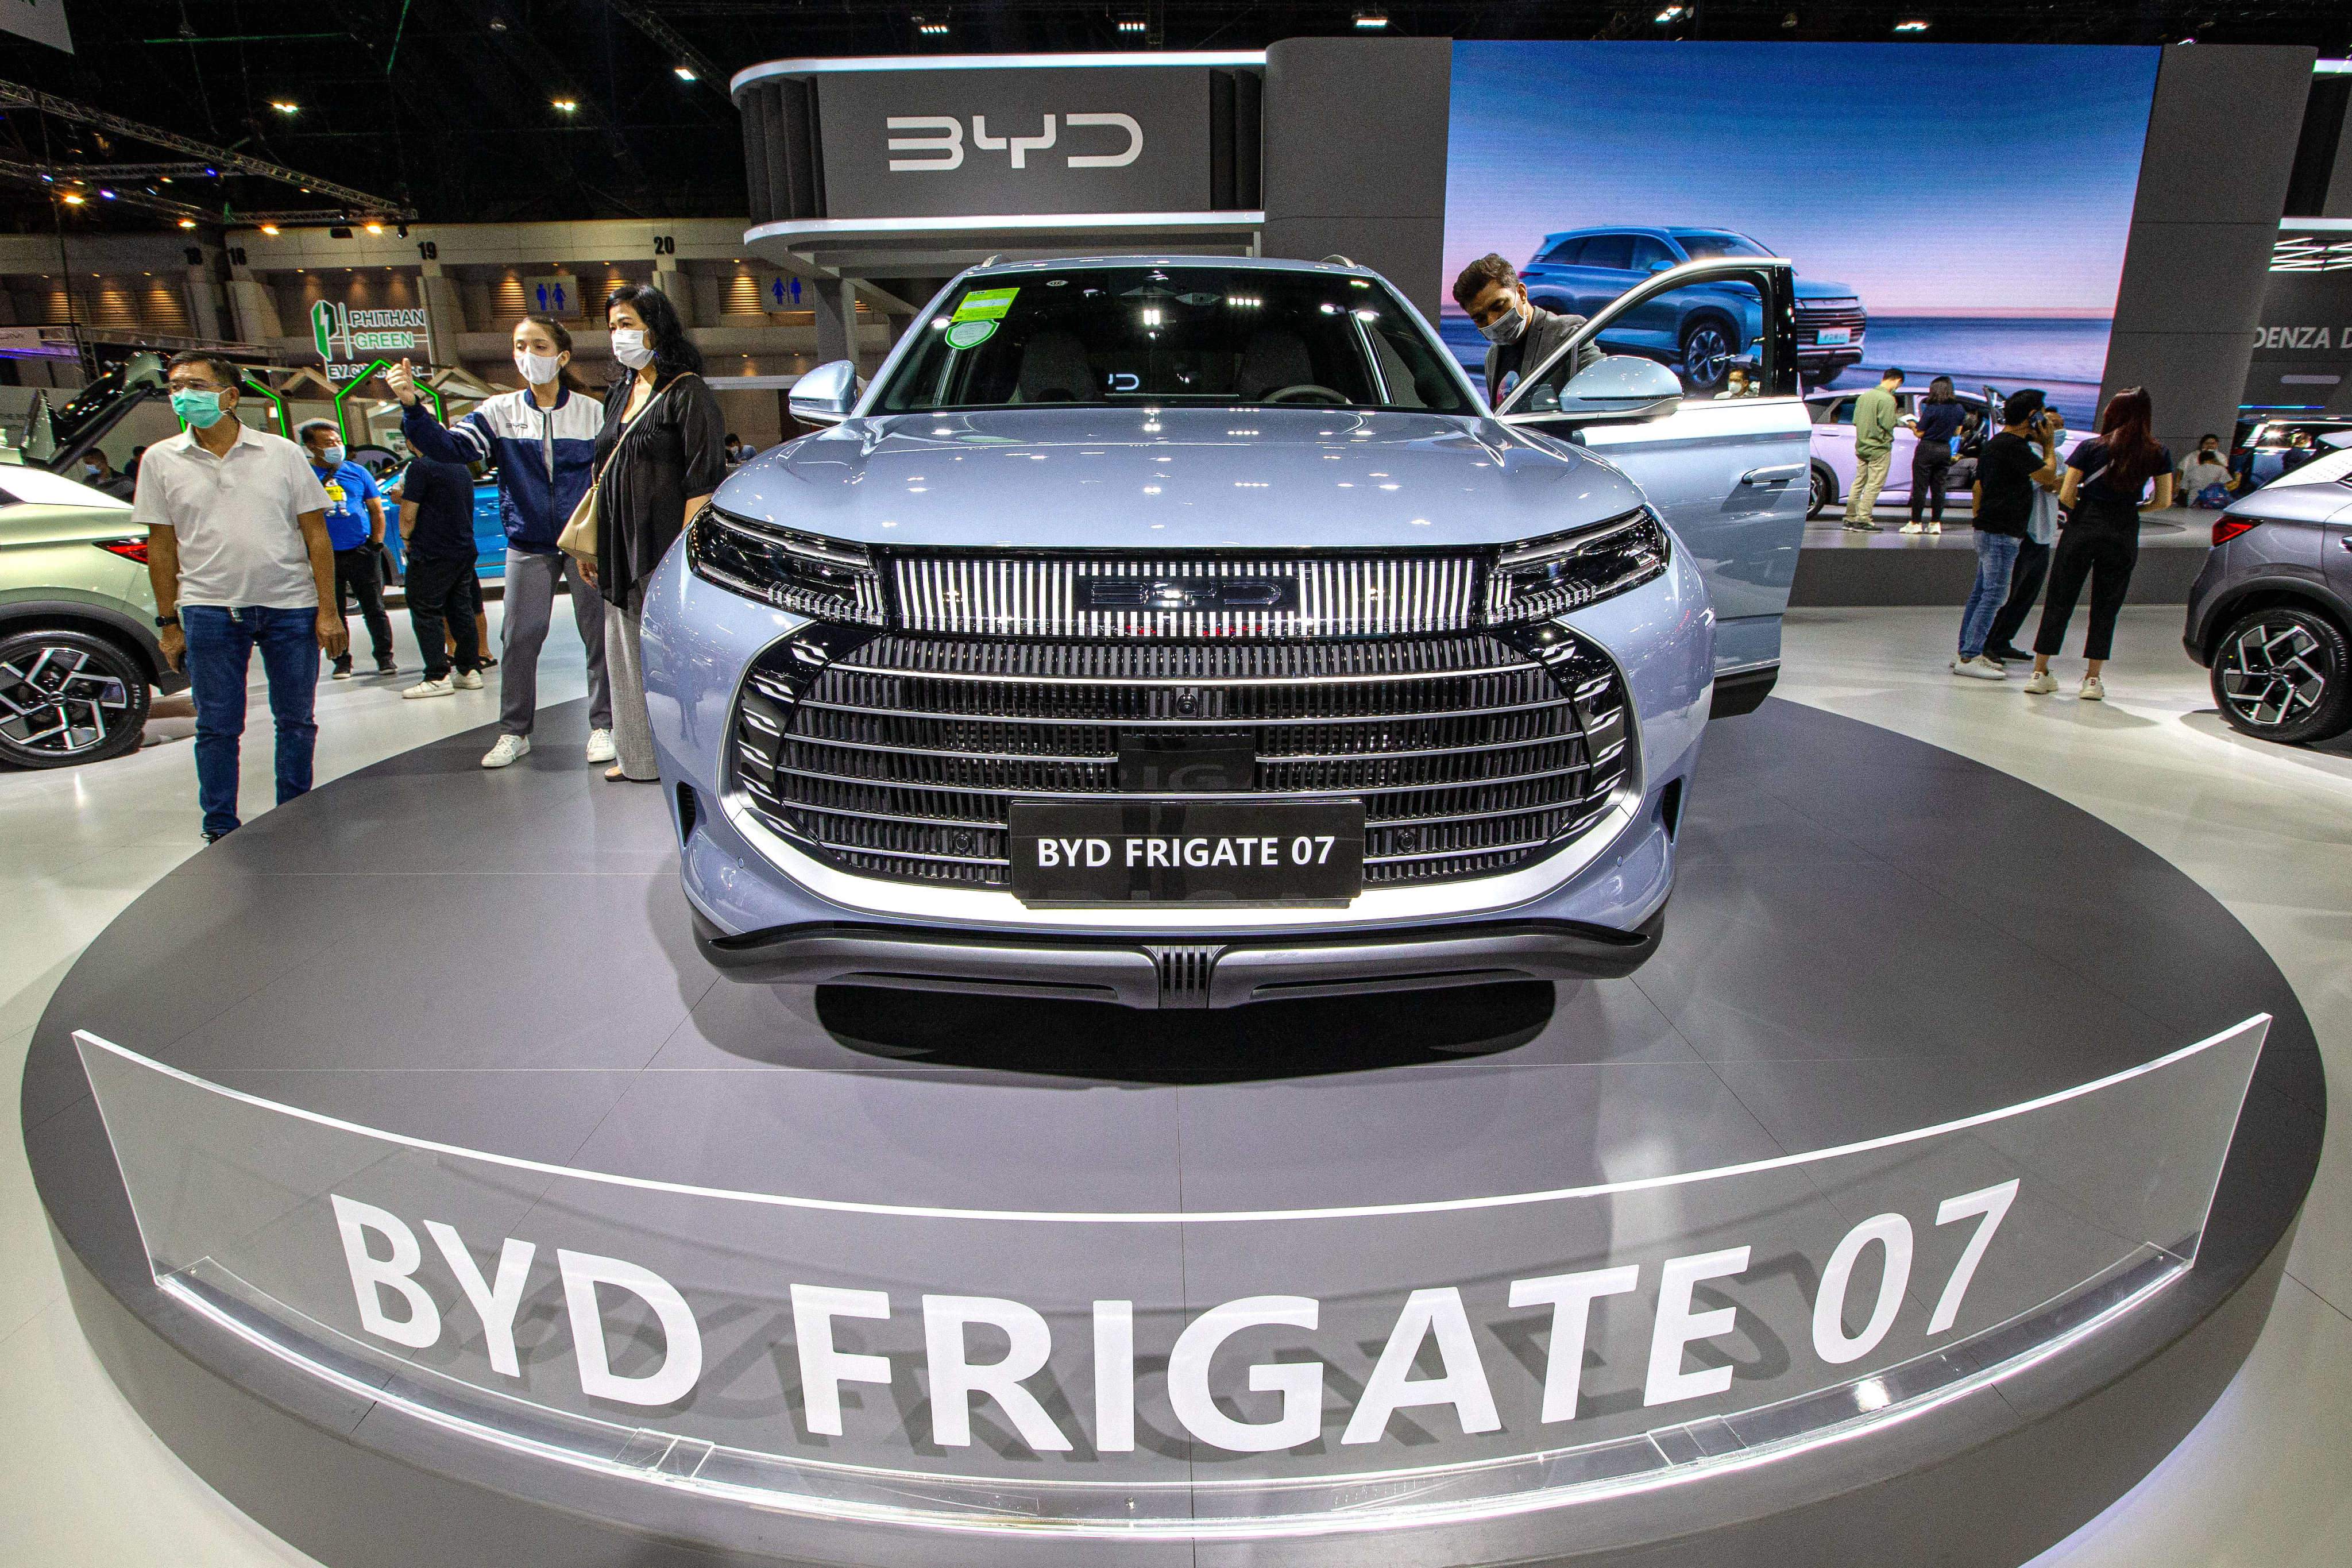 A BYD Frigate 07 SUV is displayed during the 44th Bangkok International Motor Show on March 22, 2023. Photo: Xinhua